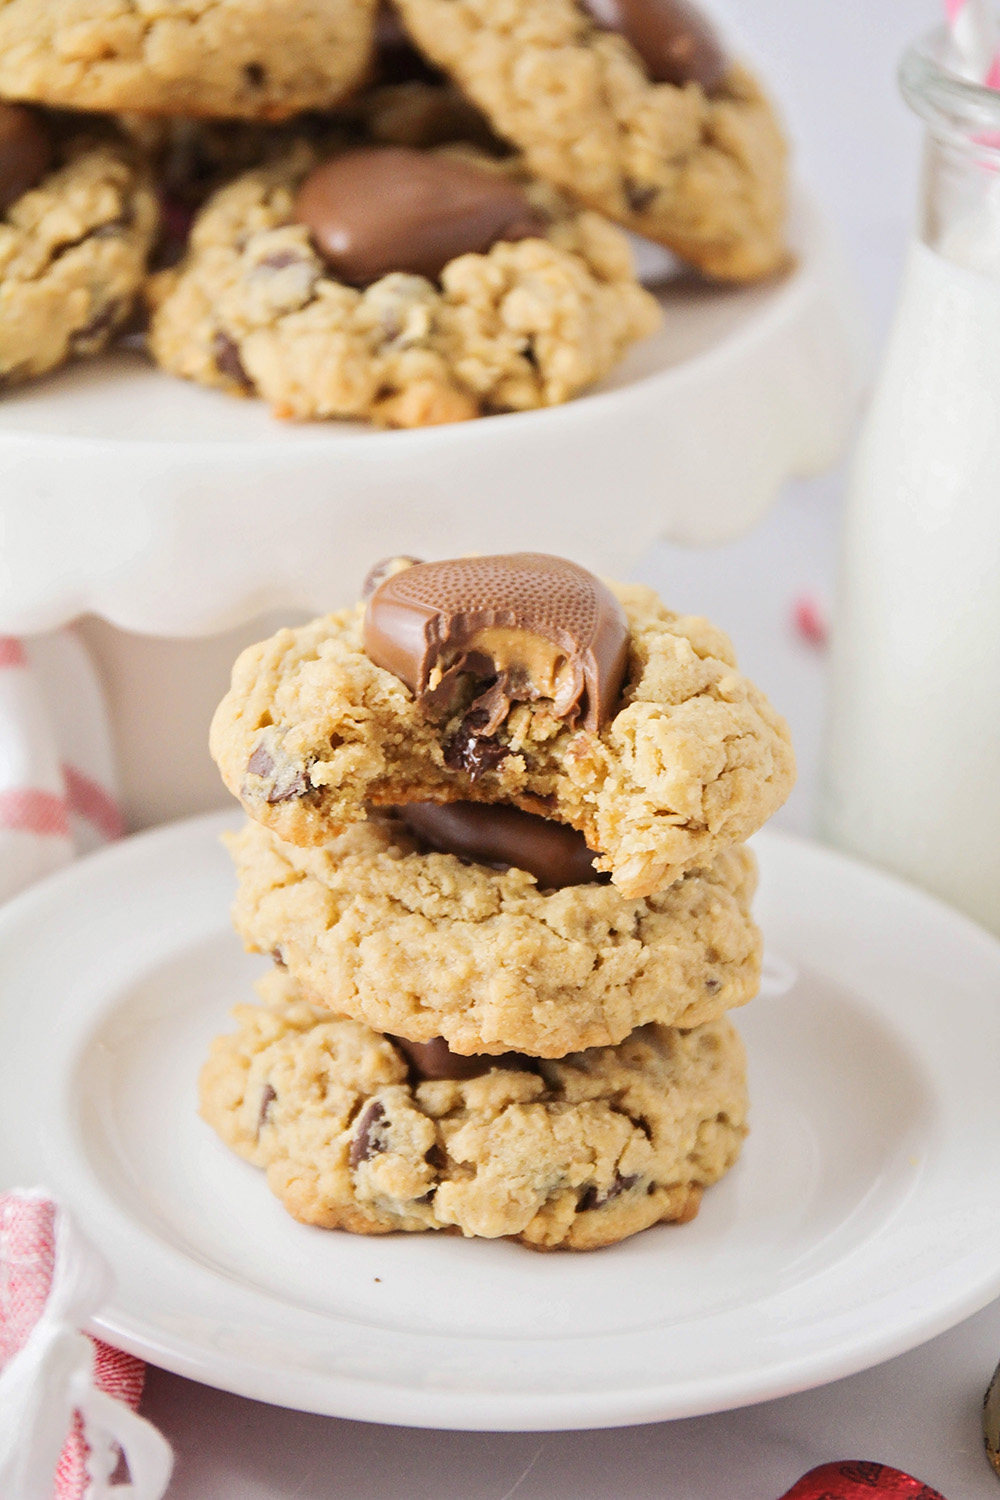 These chocolate peanut butter oatmeal cookies have the most delicious combination of flavors and textures!